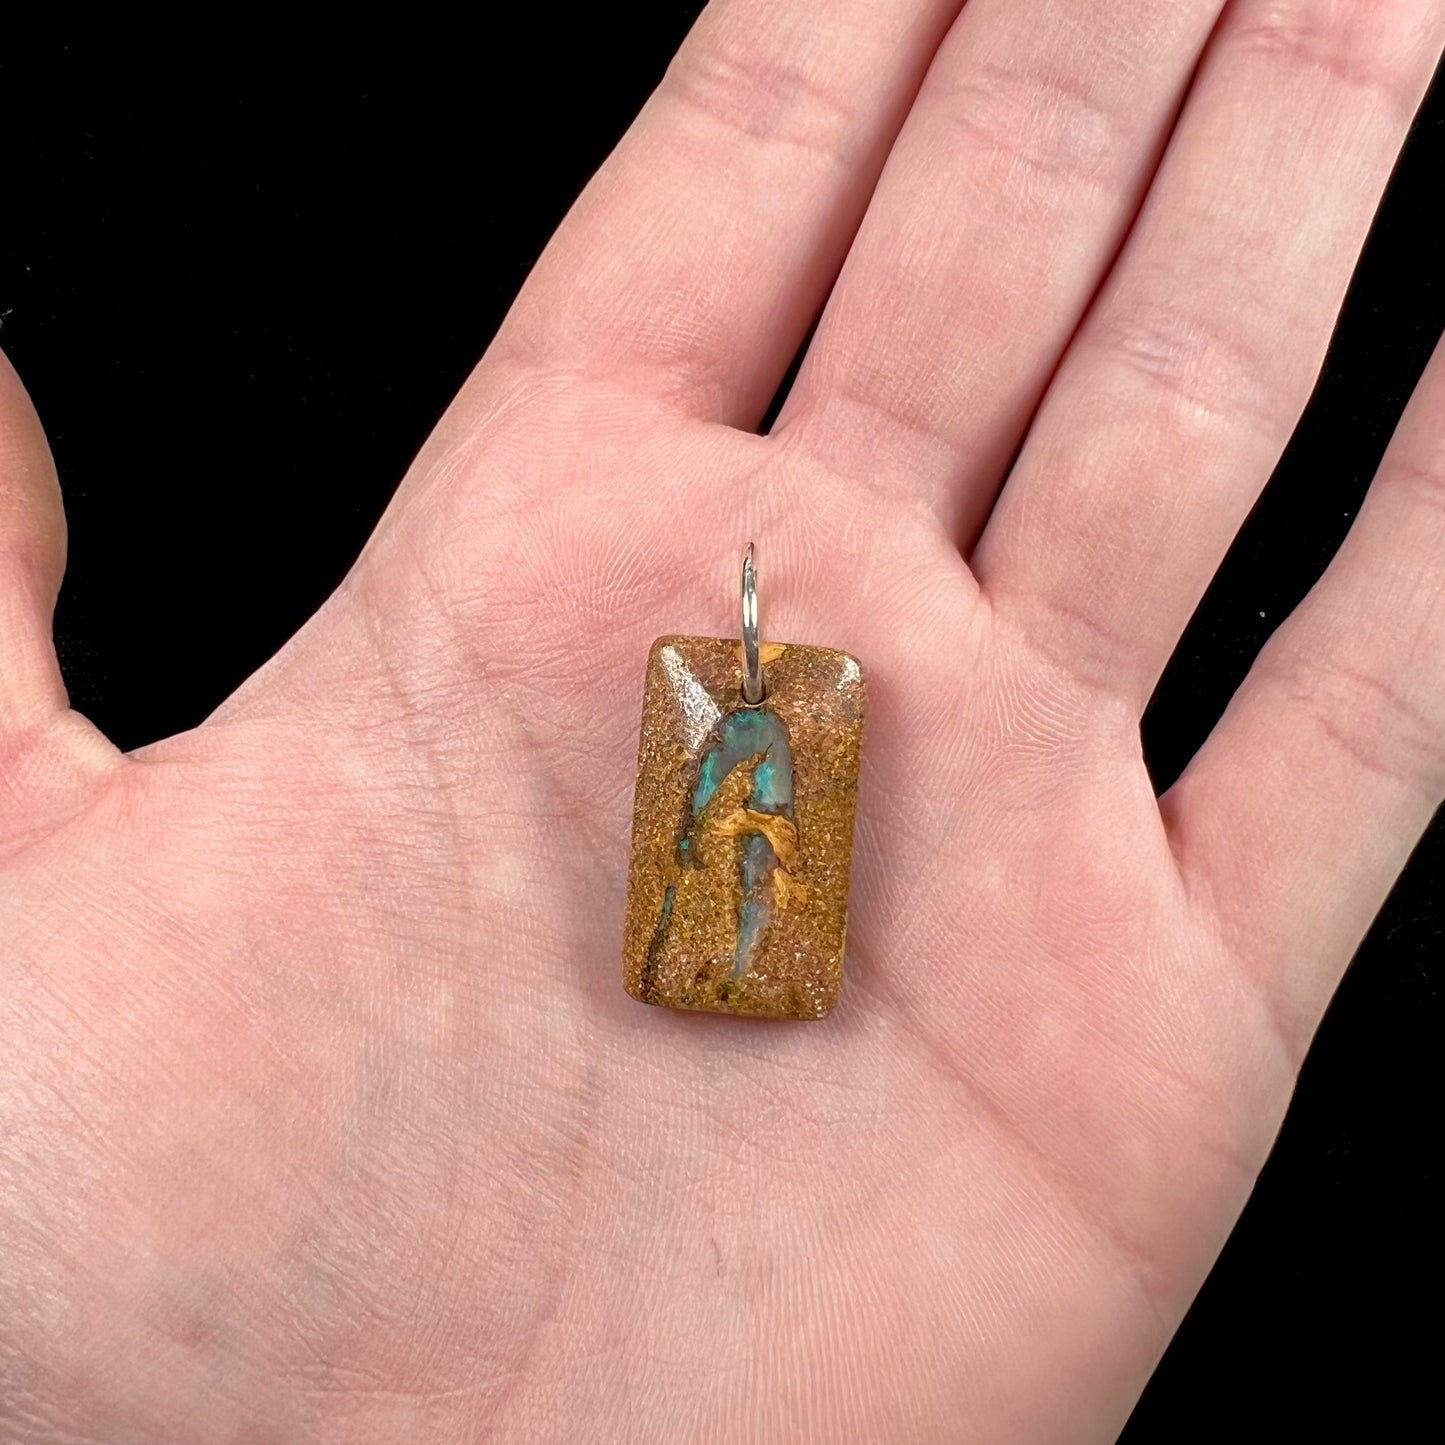 A drilled boulder opal stone with a sterling silver ring through the hole to be worn as a pendant.  The pattern resembles a hamsa hand.